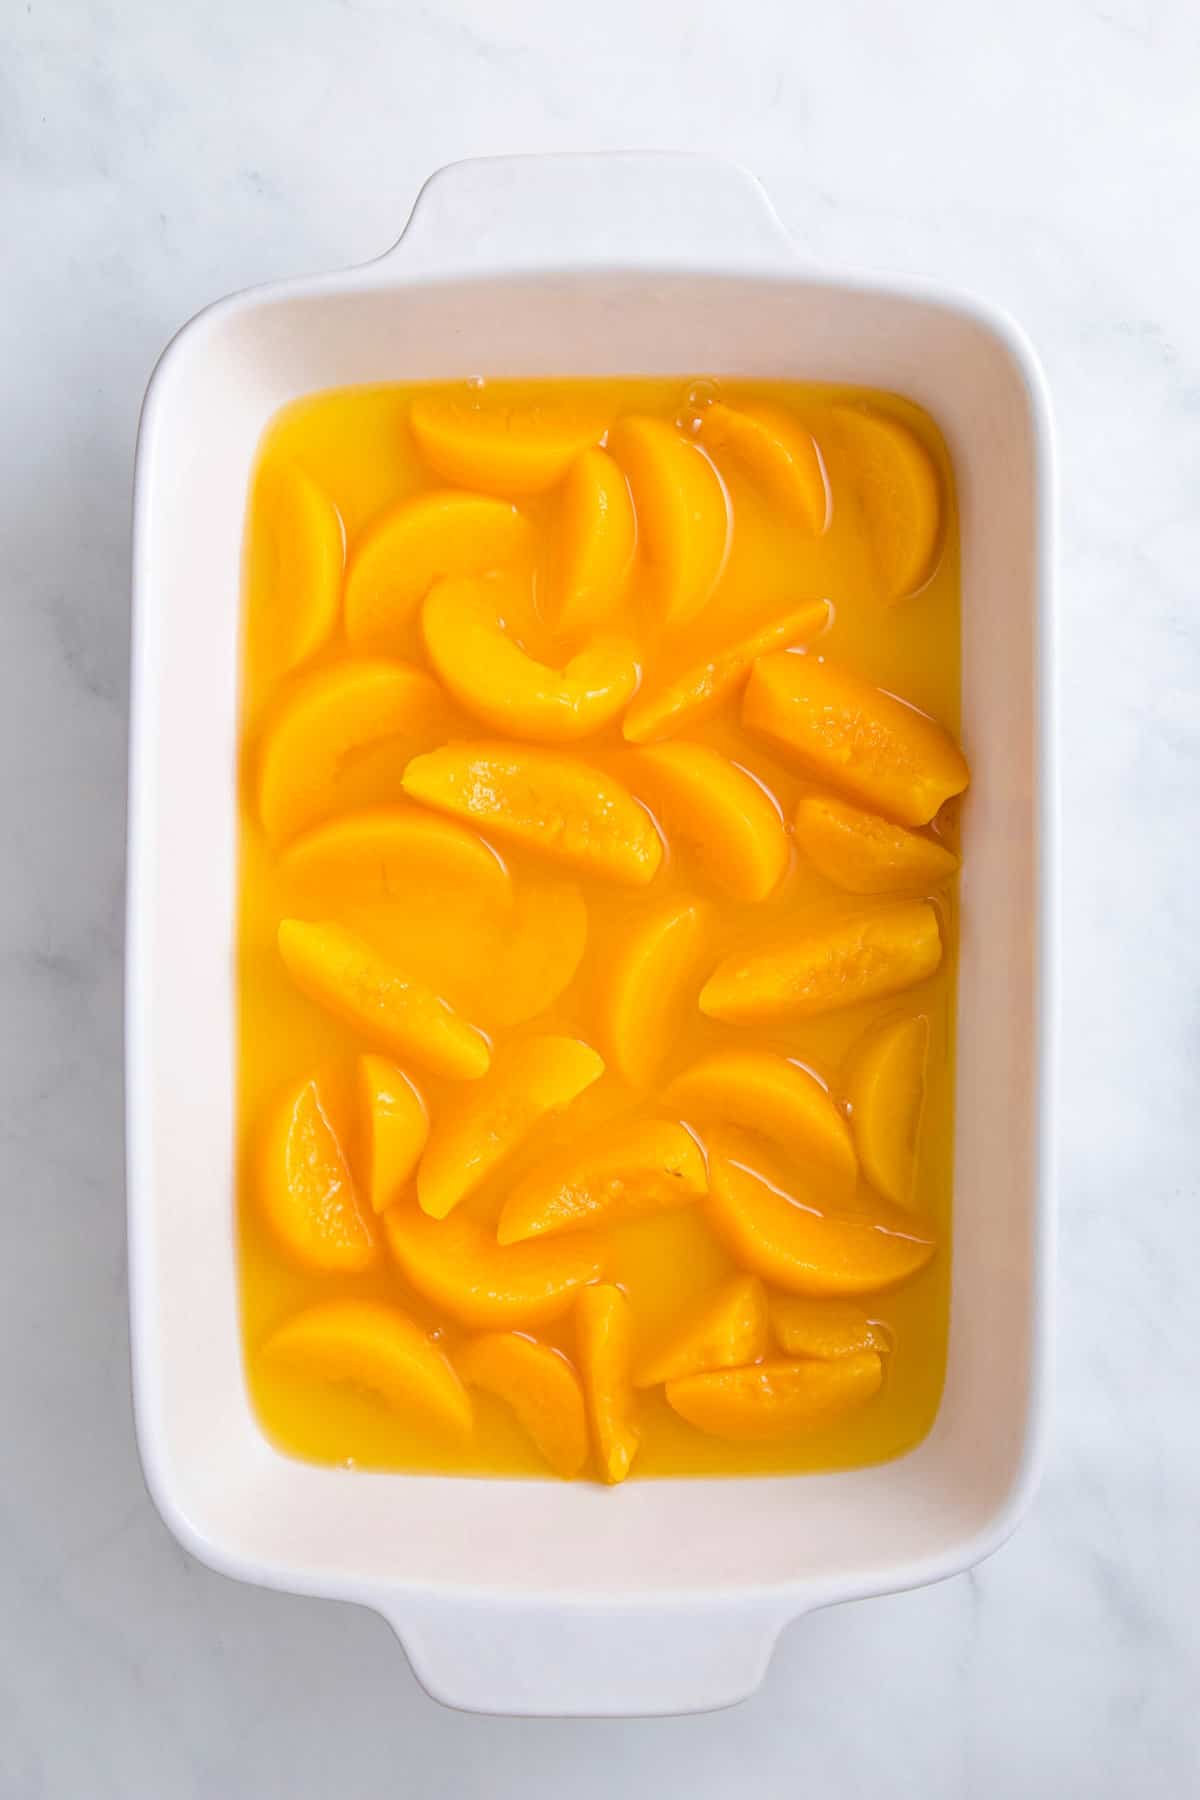 9 by 13 inch casserole dish with canned peaches